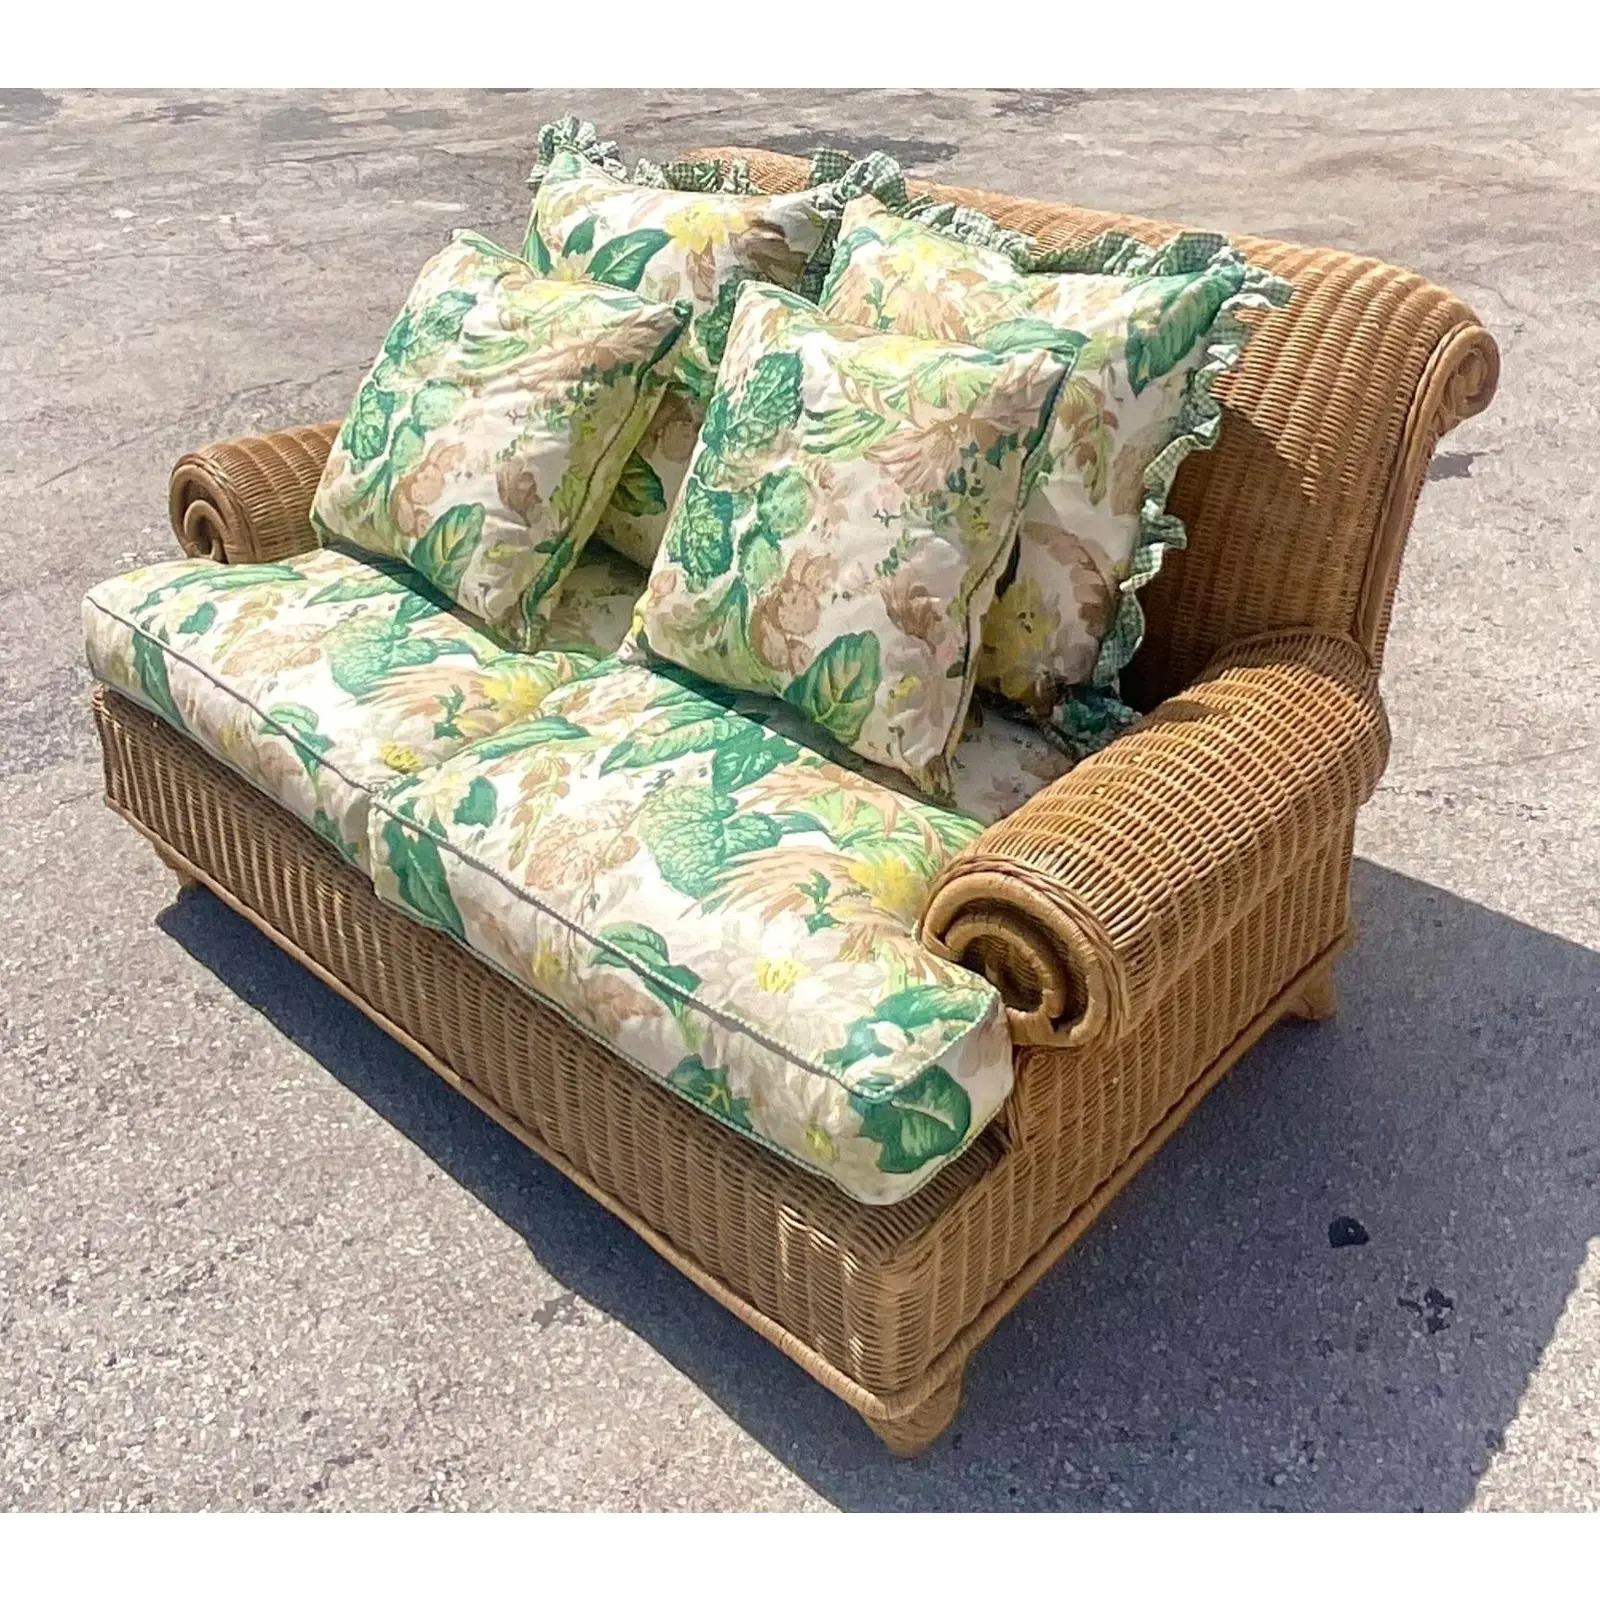 20th Century Vintage Coastal Ralph Lauren Woven Rattan Roll Arm Loveseat with Floral Cushions